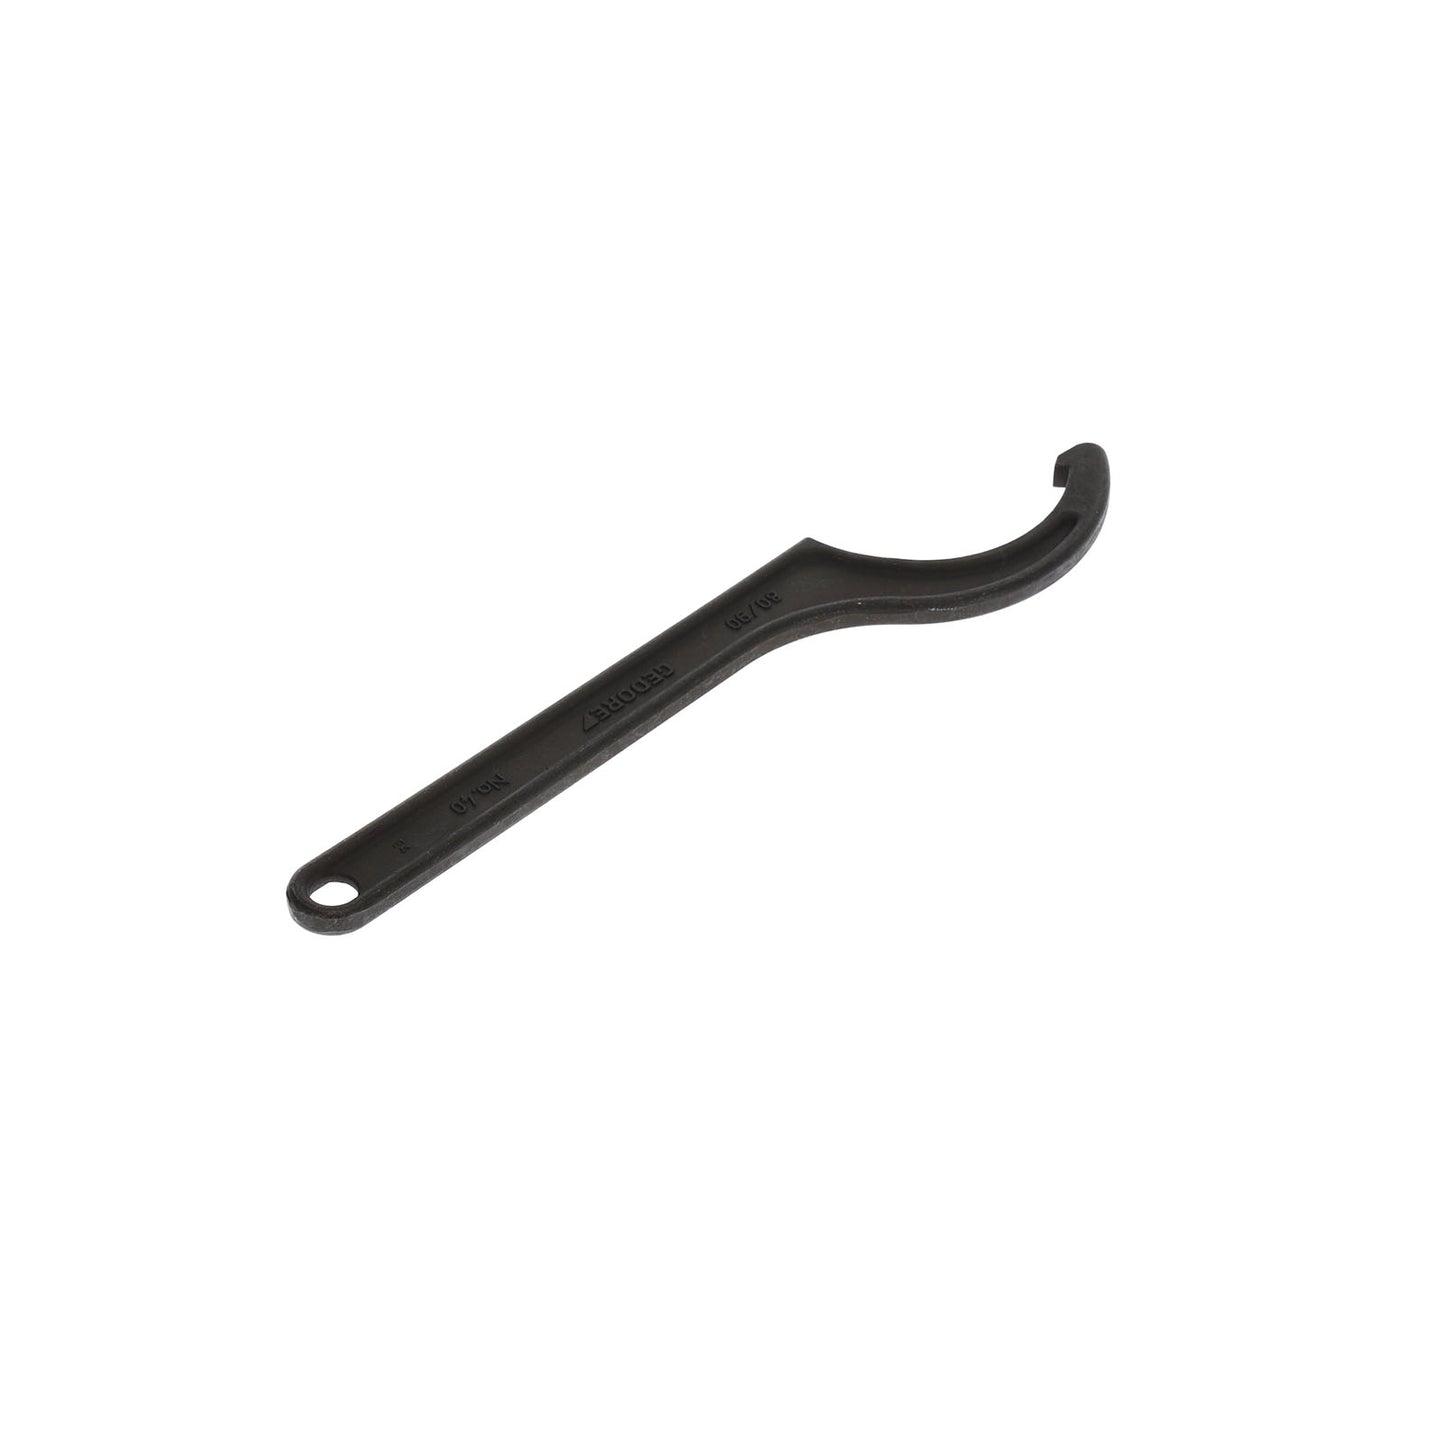 GEDORE 40 80-90 - Hook Wrench, 80-90 (6334960)